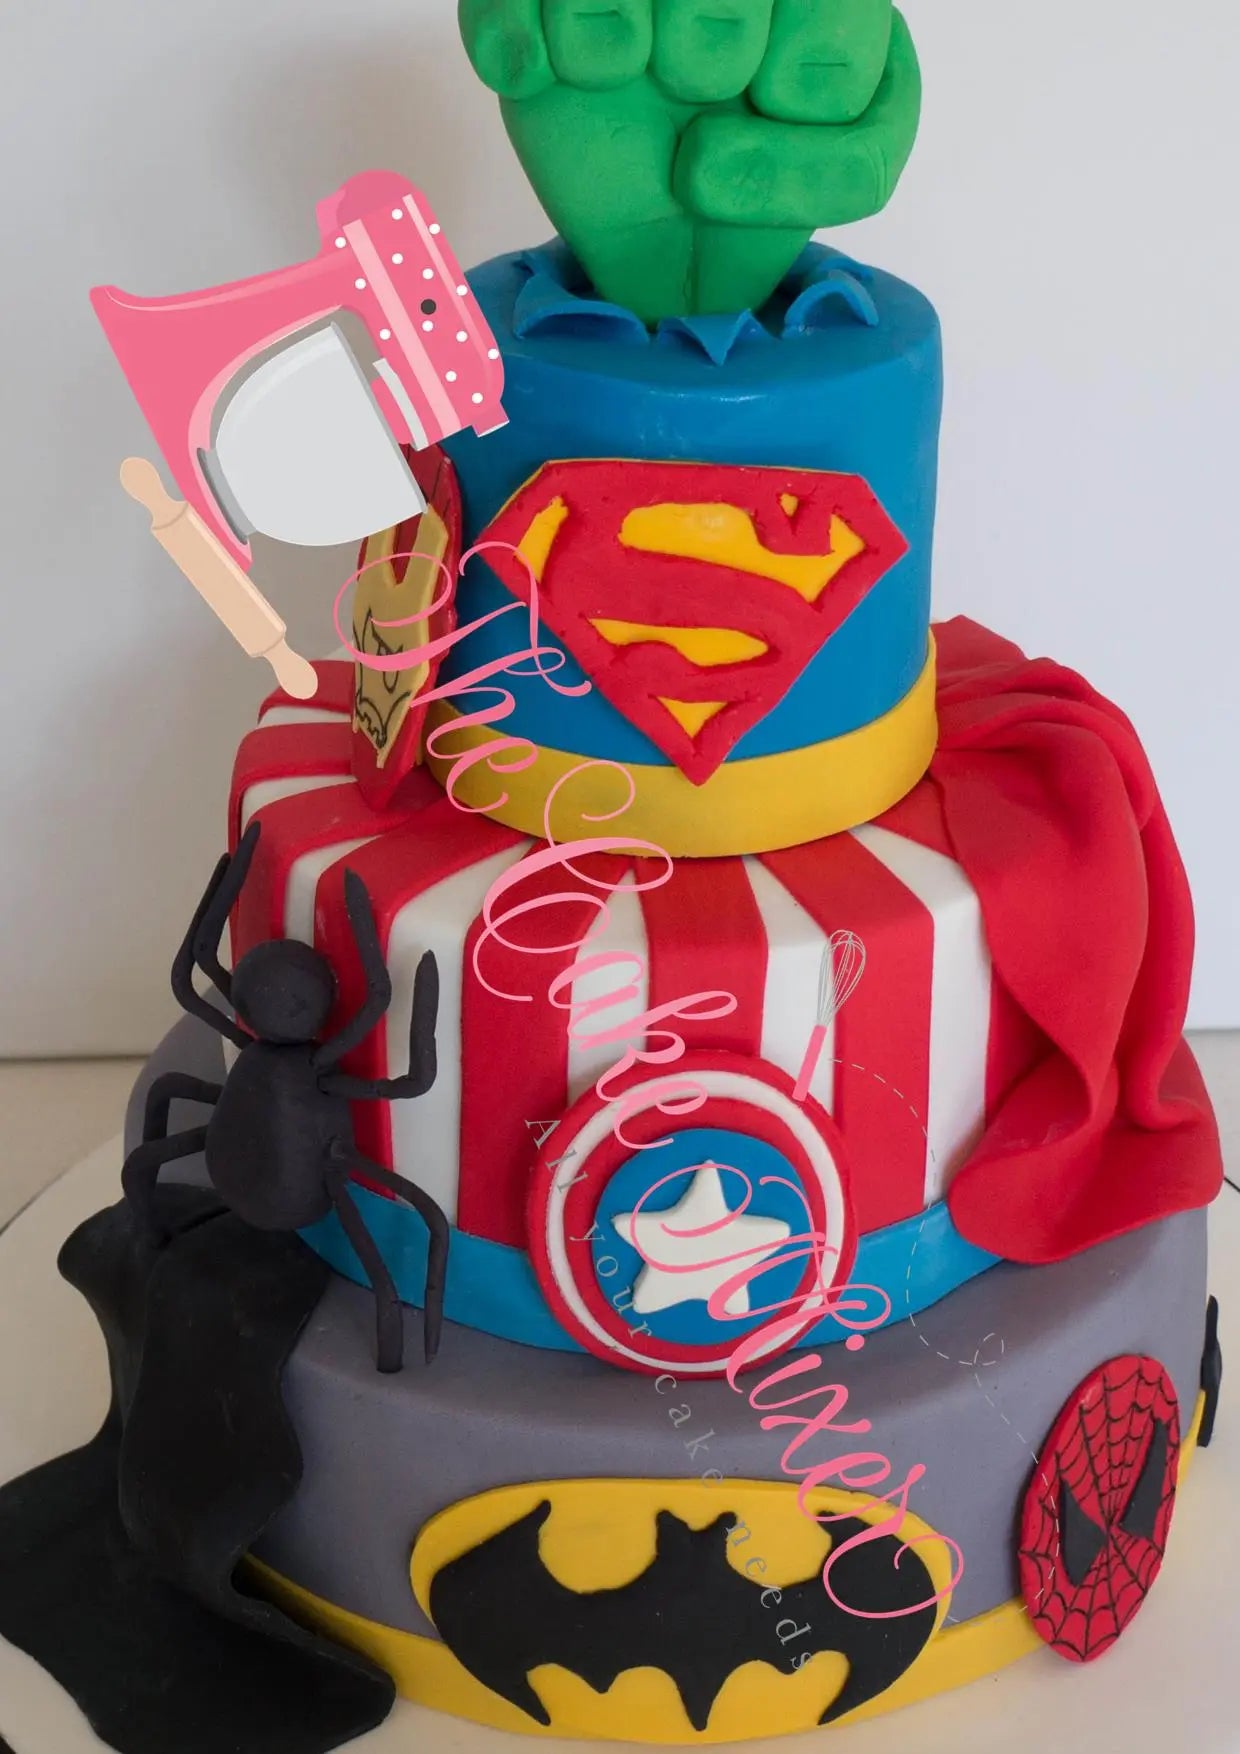 17 Toppers for Superhero Birthday Cake Toppers Cupcake Toppers Set Cake  Decorations Party Supplies Topper for Fans of Super Hero